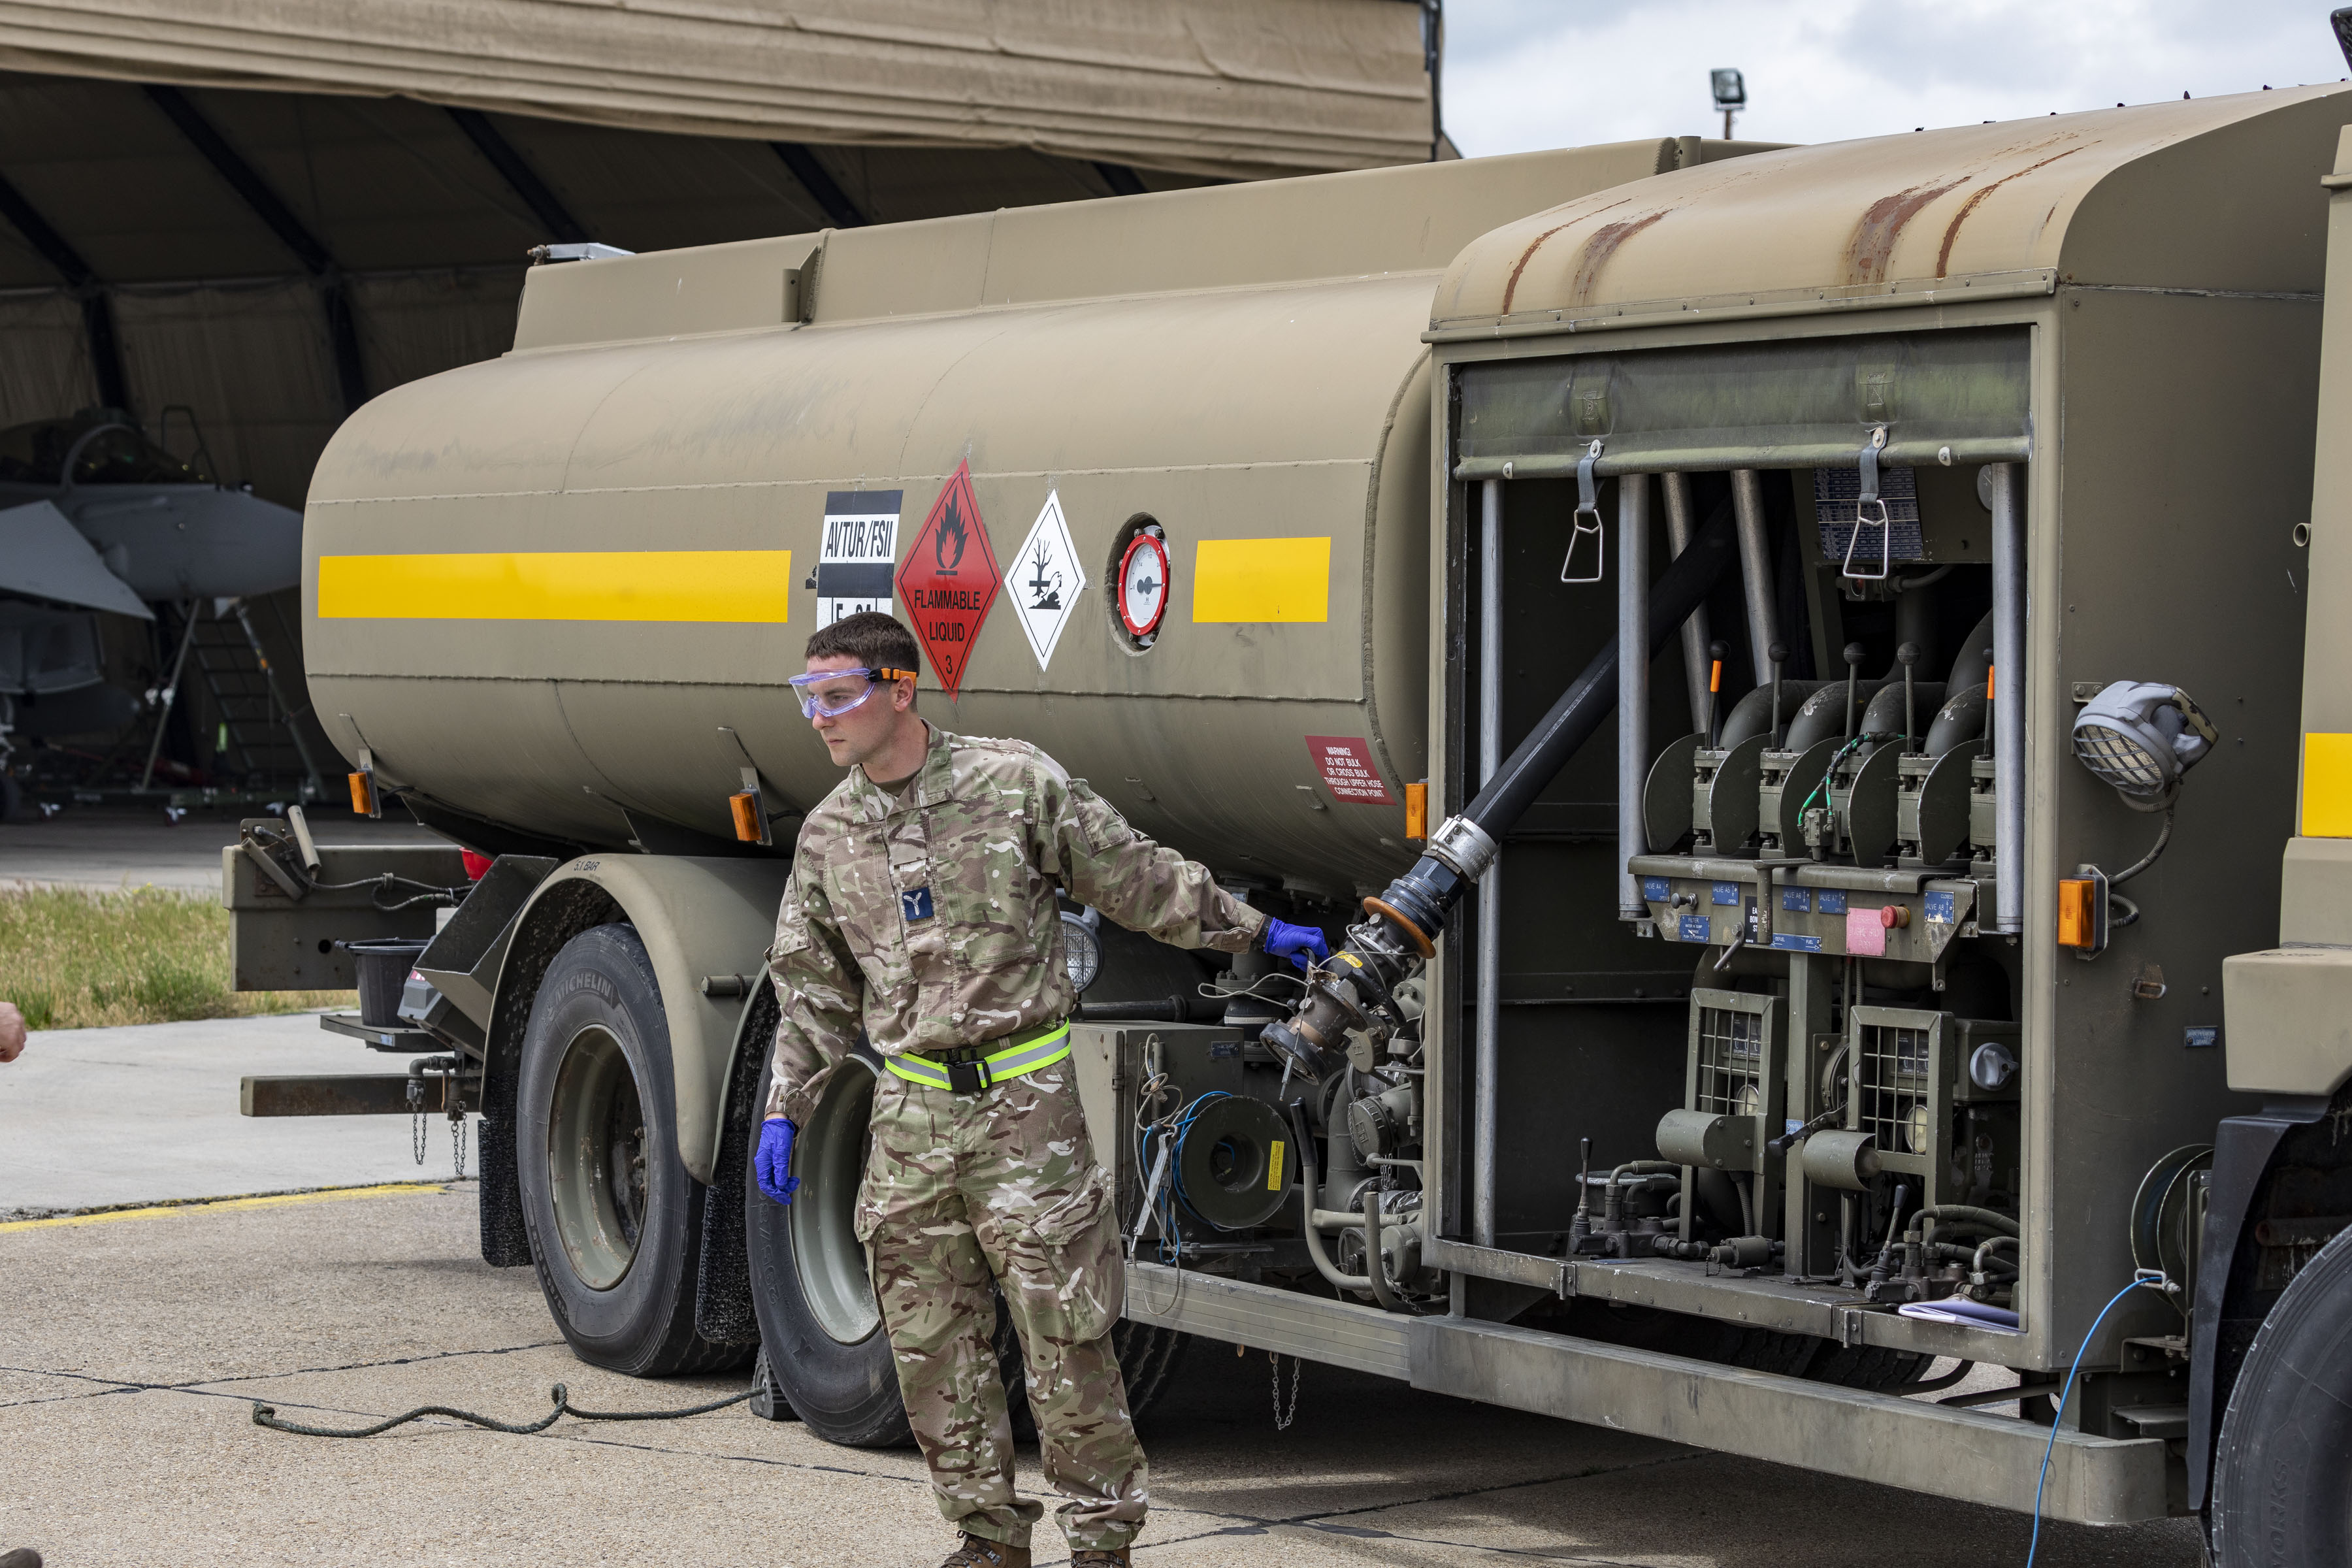 SAC Kirk from 2MT Sqn on refuelling duties (note the Typhoon in the background)